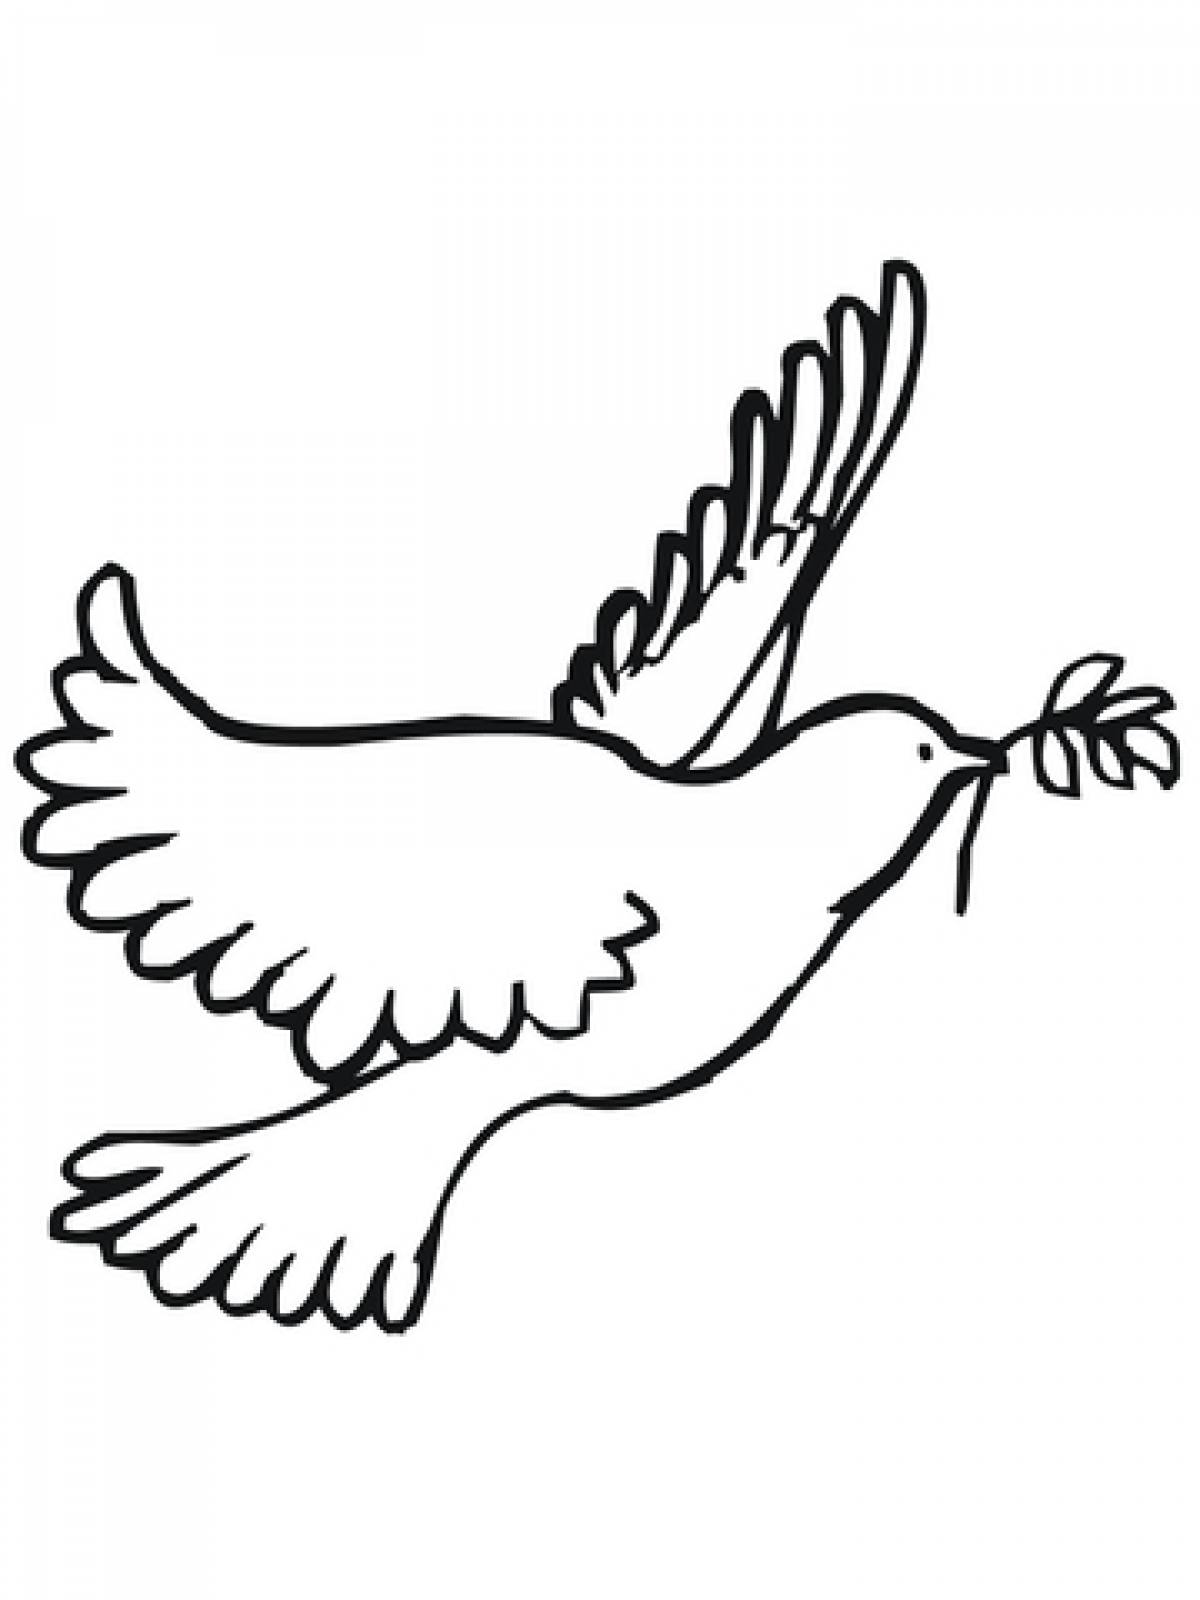 Peace dove drawing